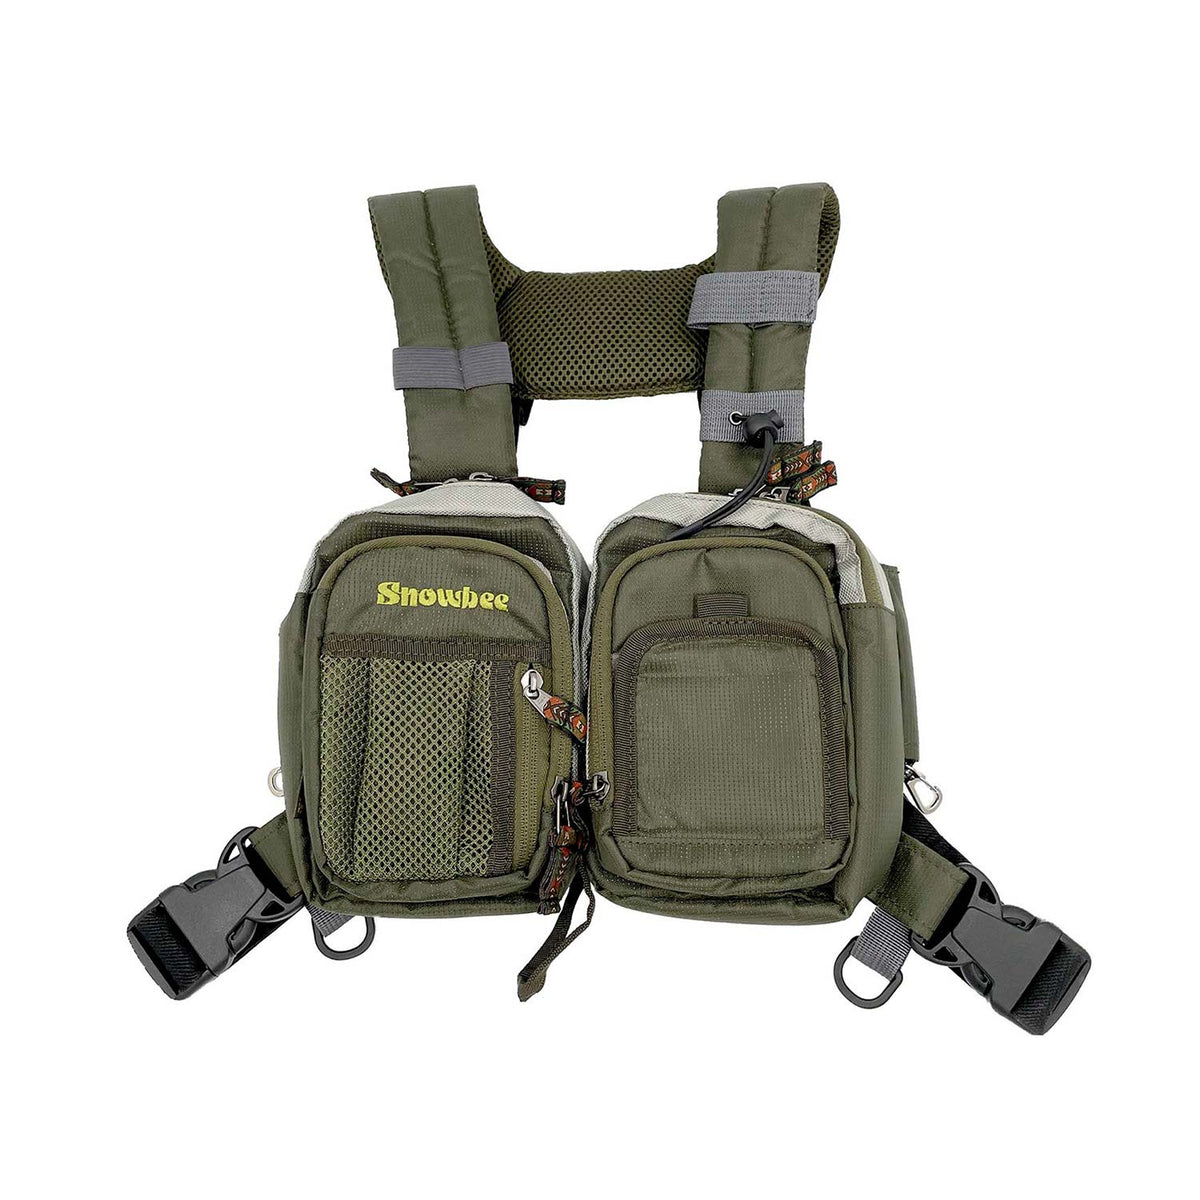 Ultralight Chest-Pack by Snowbee USA